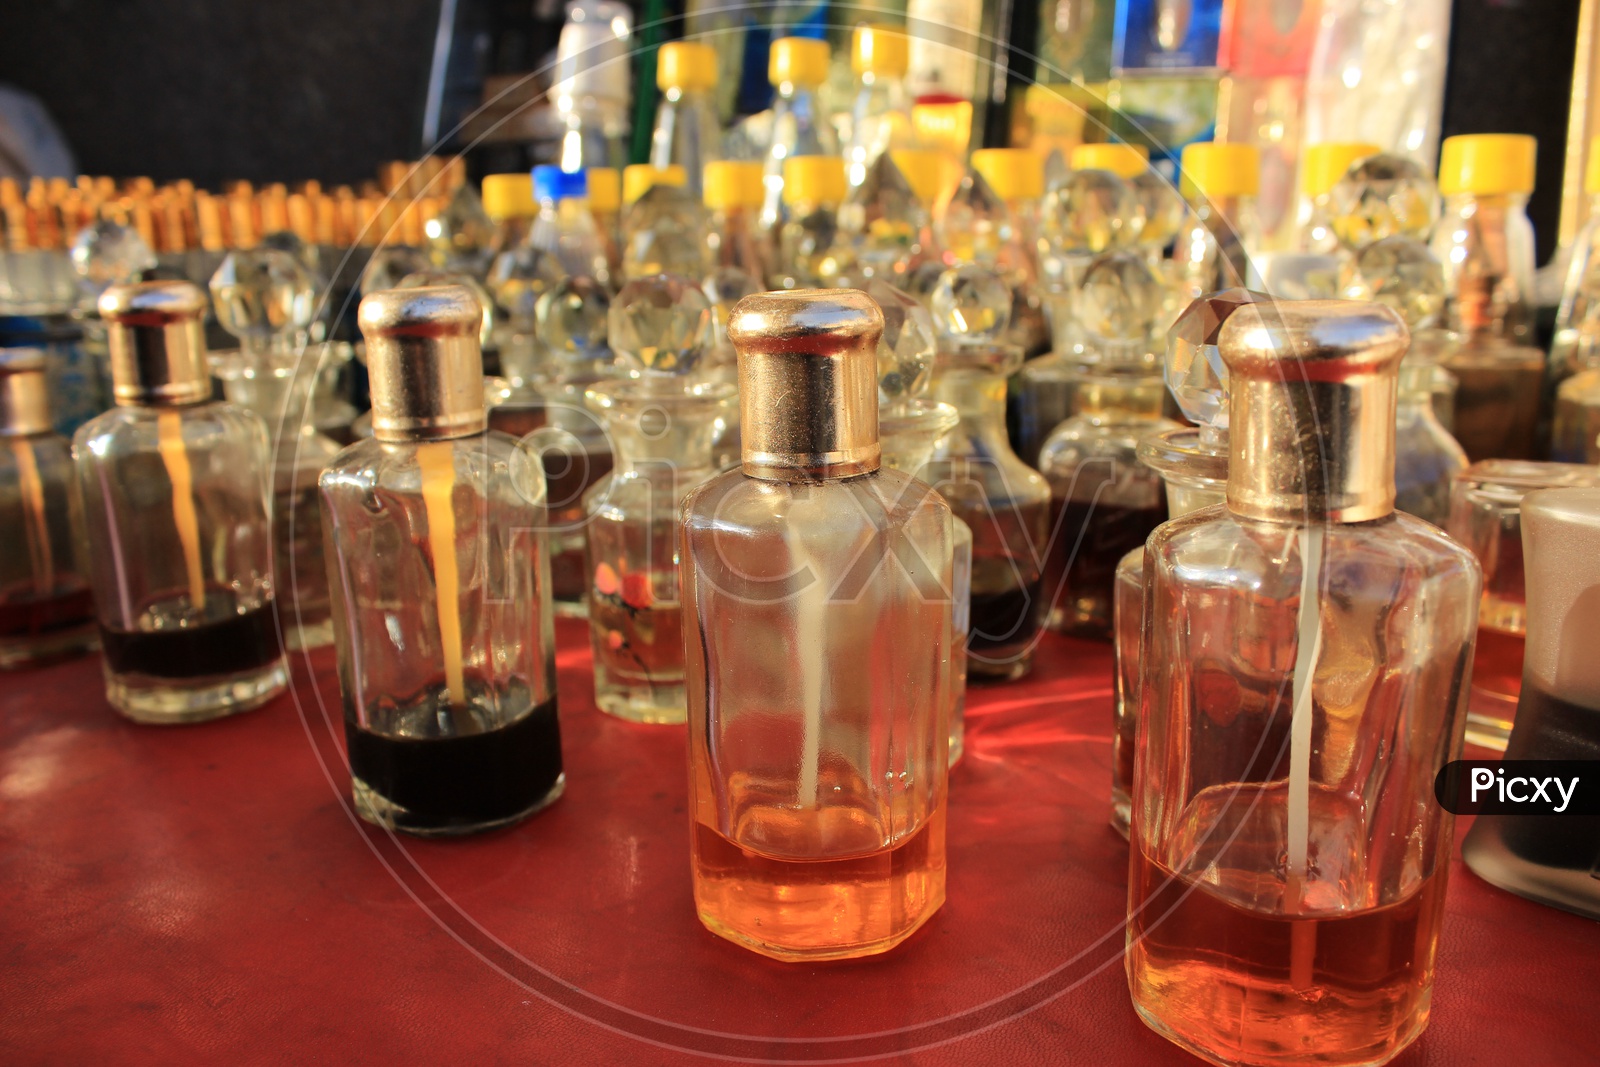 Perfumes Bottles Selling At Mecca Masjid Or Mosque  Near Charminar